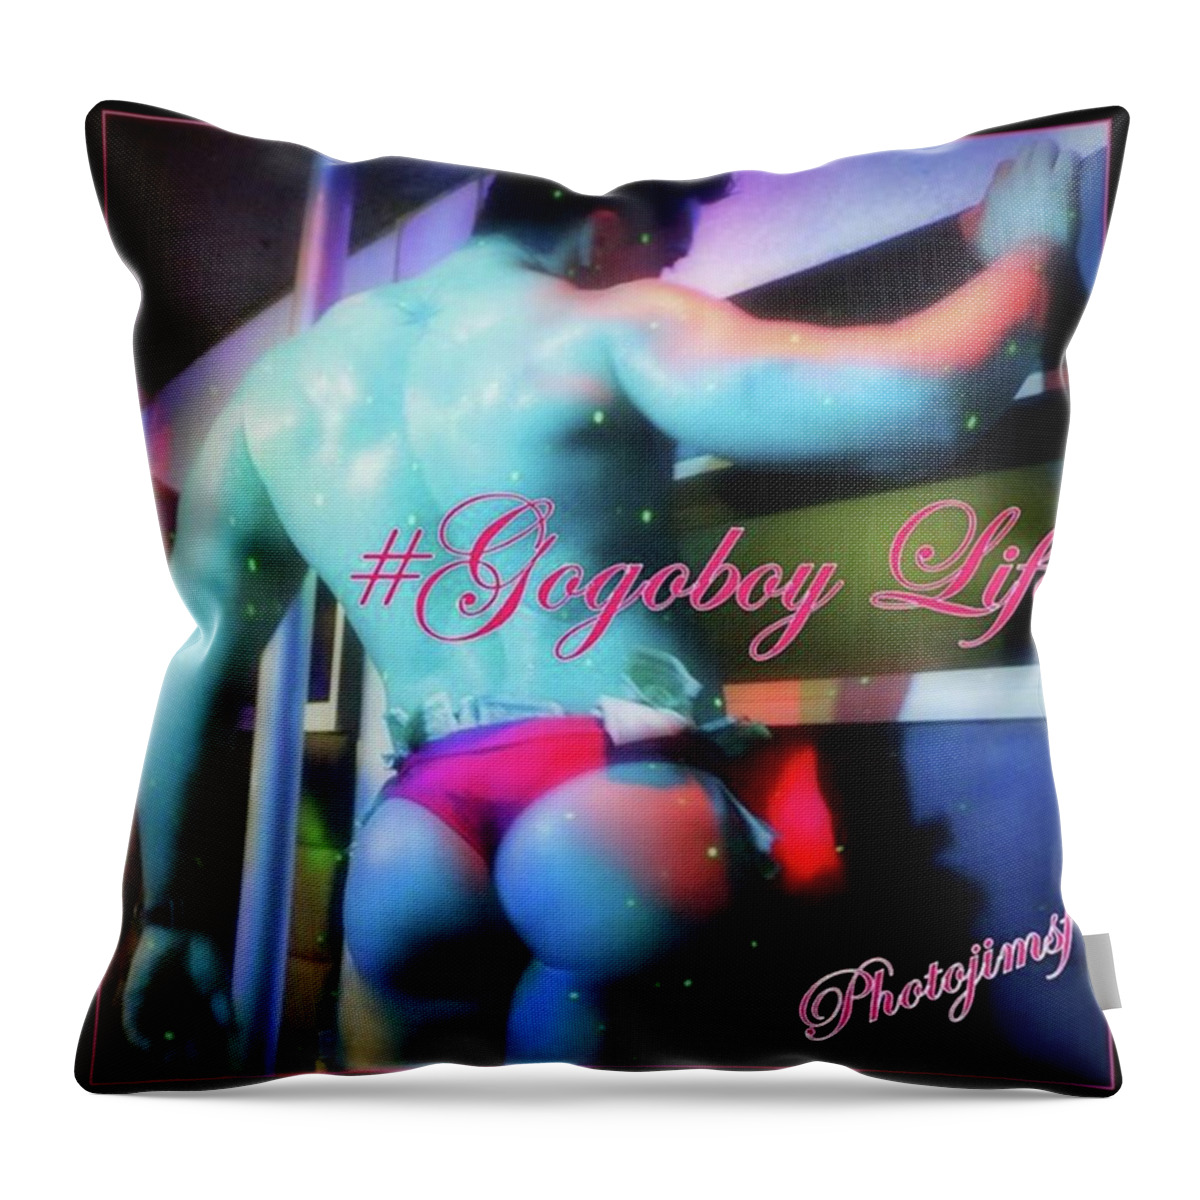 Gigantesf Throw Pillow featuring the photograph #gigantesf #latinhiphop @friscorobbie by Mr Photojimsf